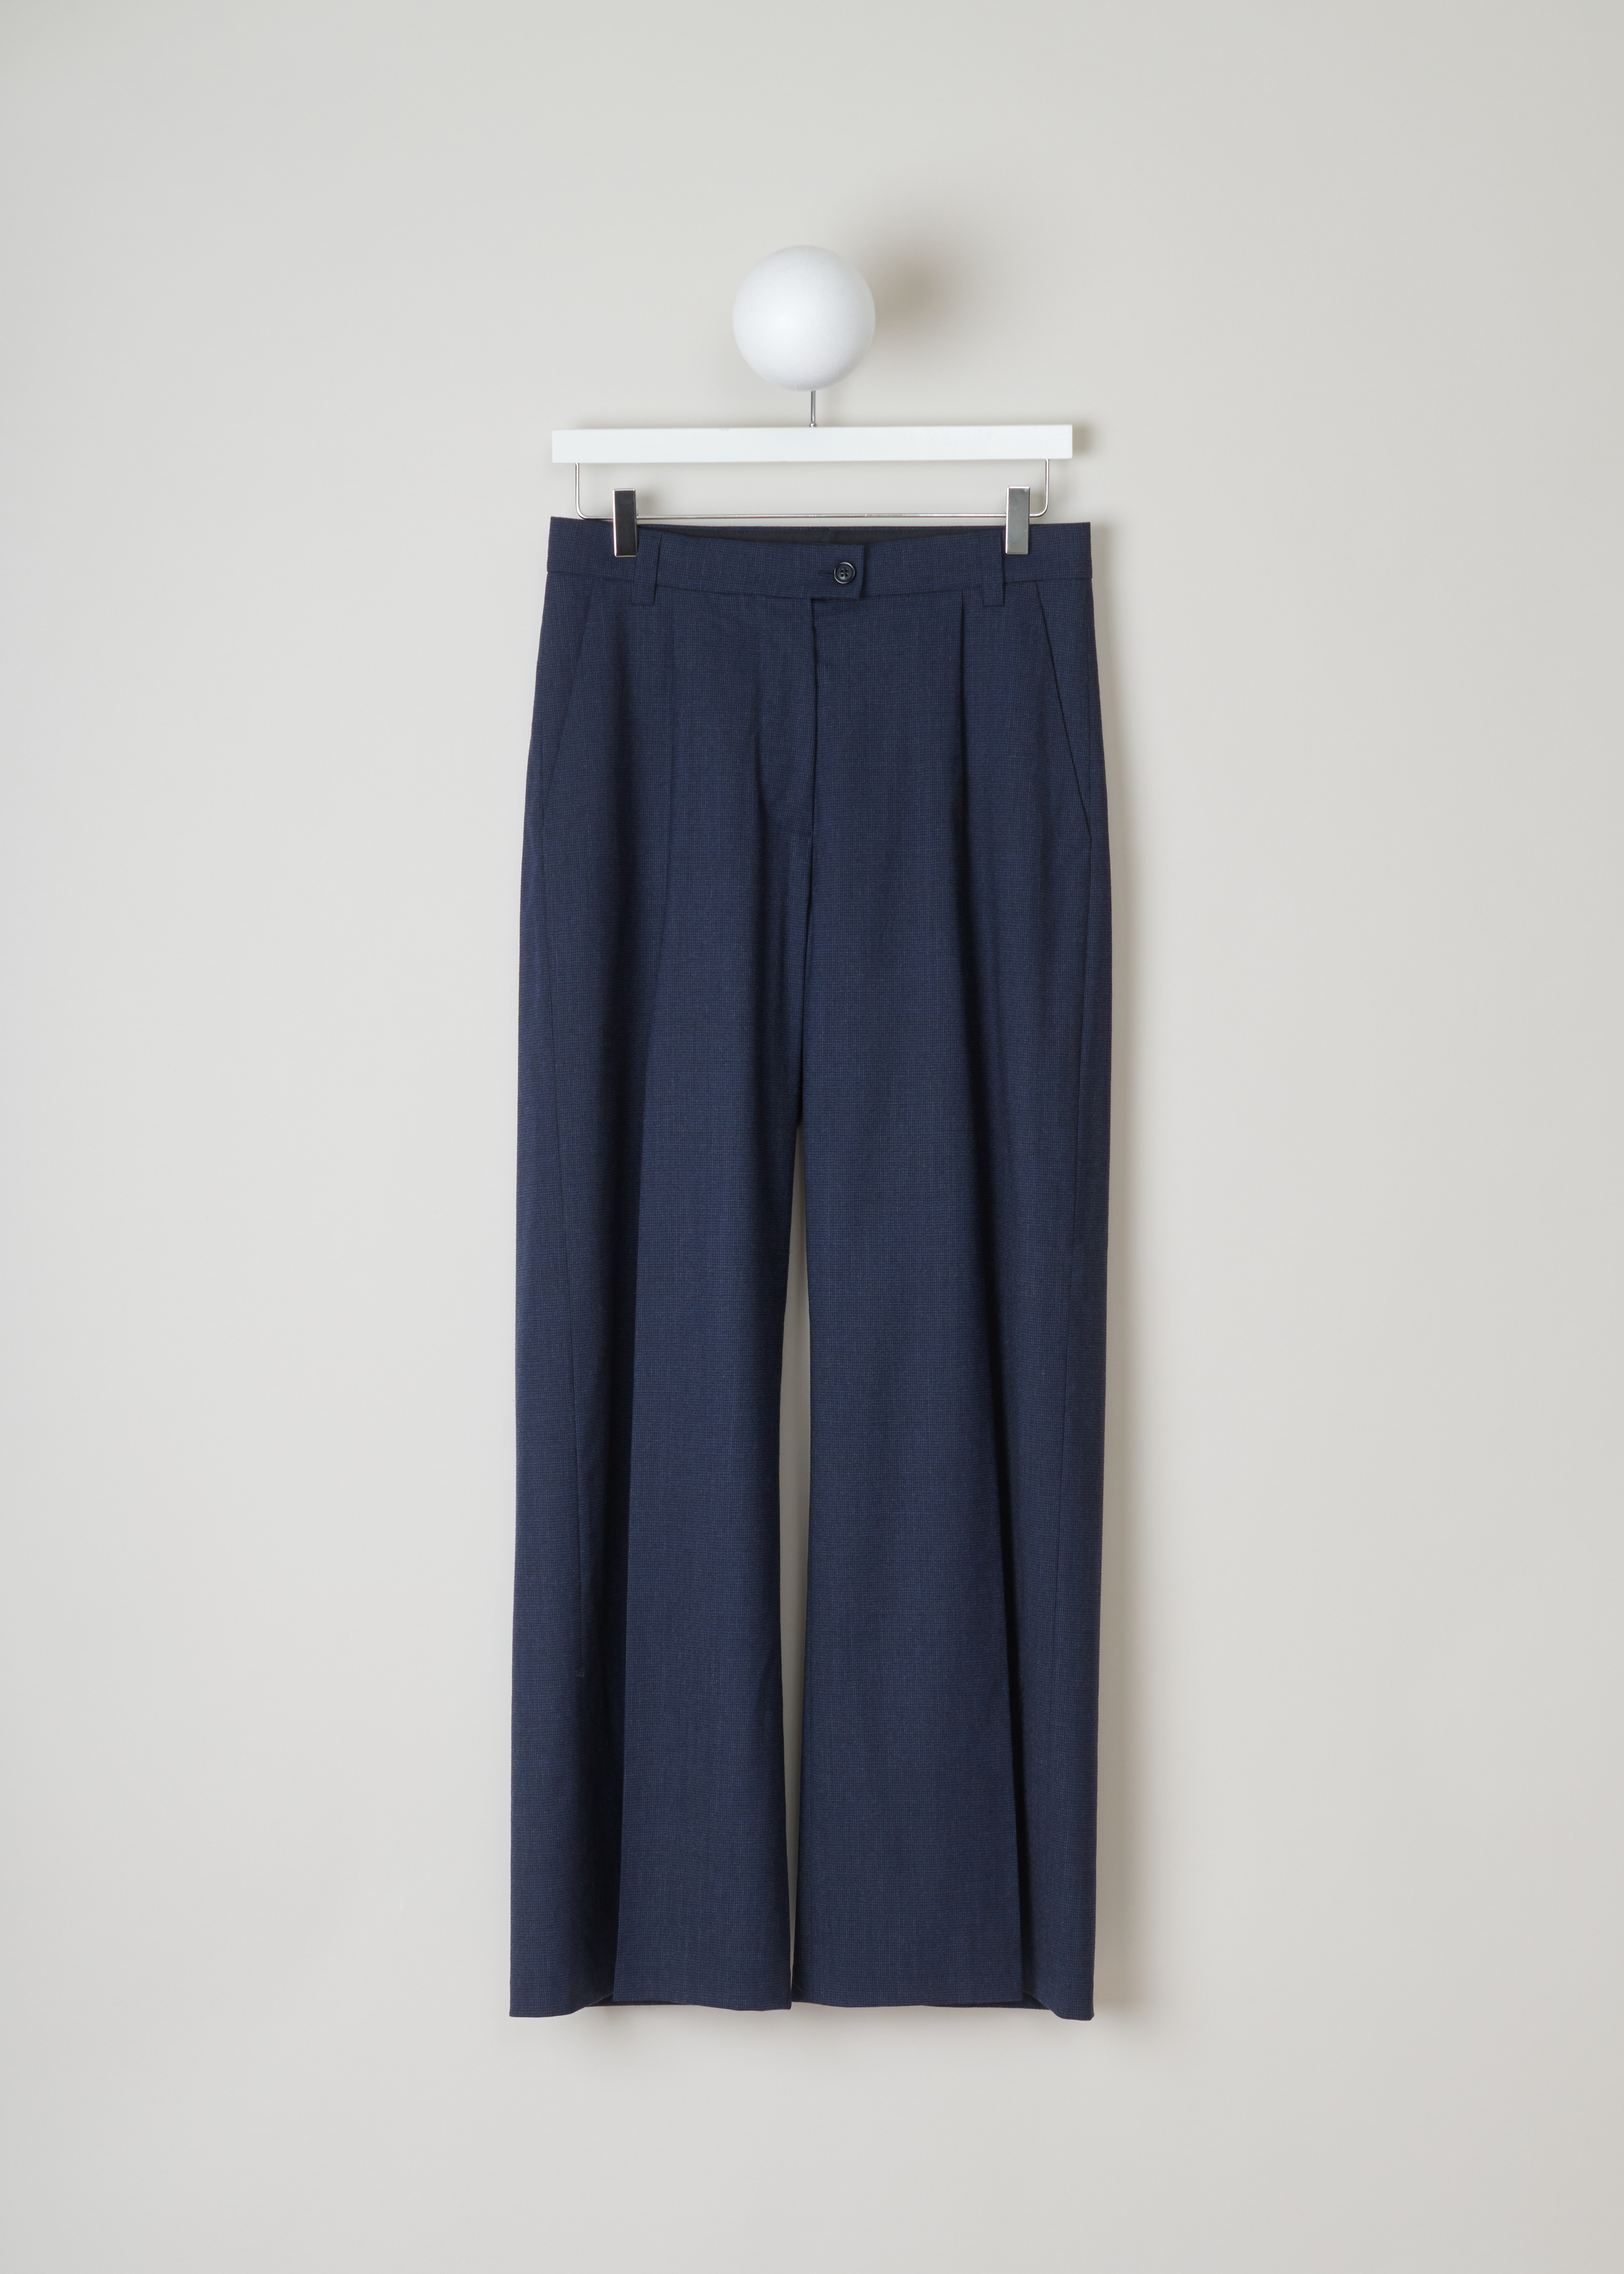 Aspesi Loose navy trousers I9G_0107_G841_40096 navy blue front. Wide legged trousers with centre creases, a waistband with belt loops and pleats, side pockets and welt pockets on the back.